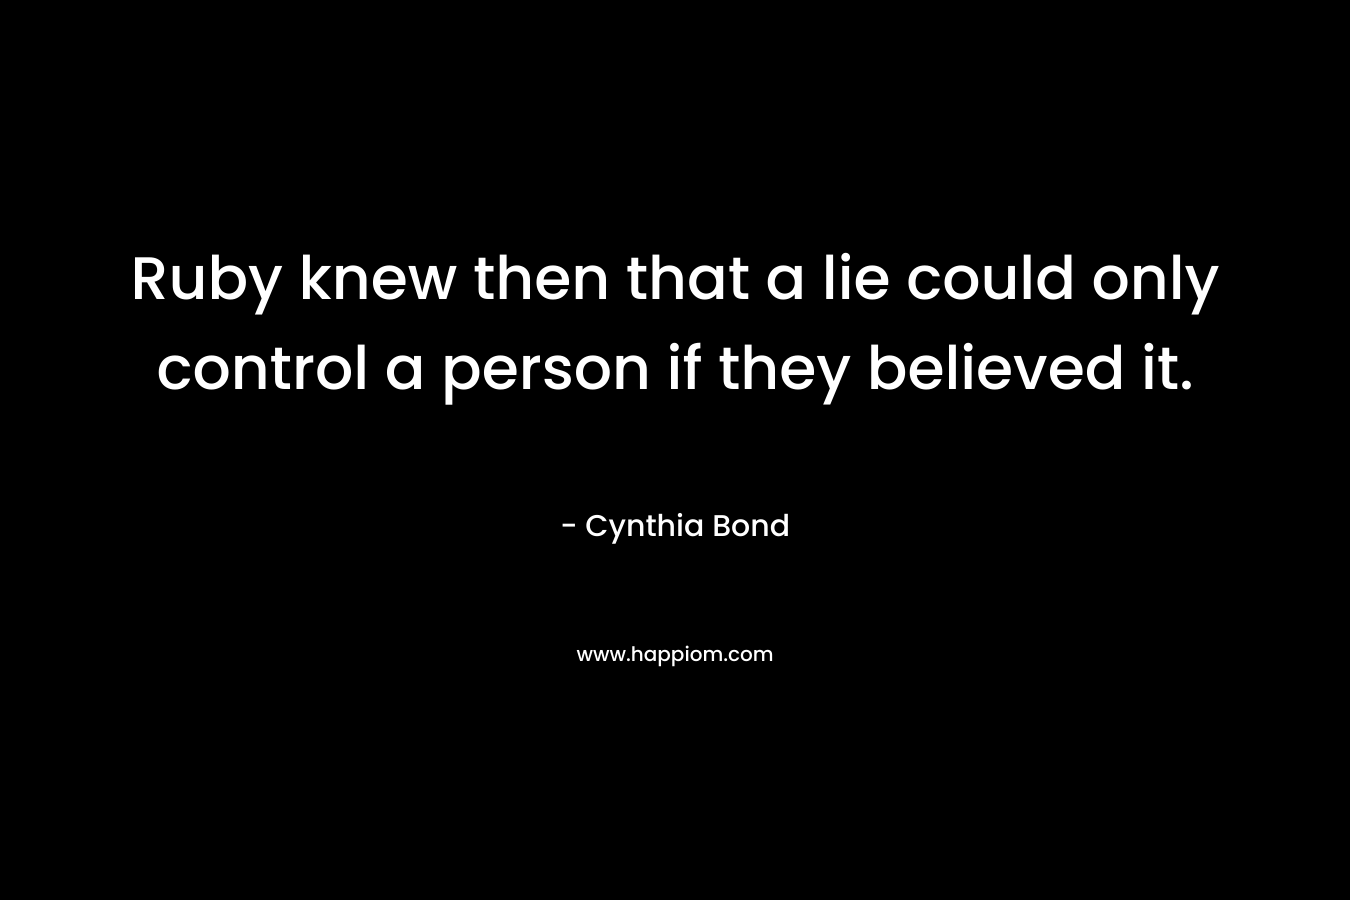 Ruby knew then that a lie could only control a person if they believed it. – Cynthia Bond